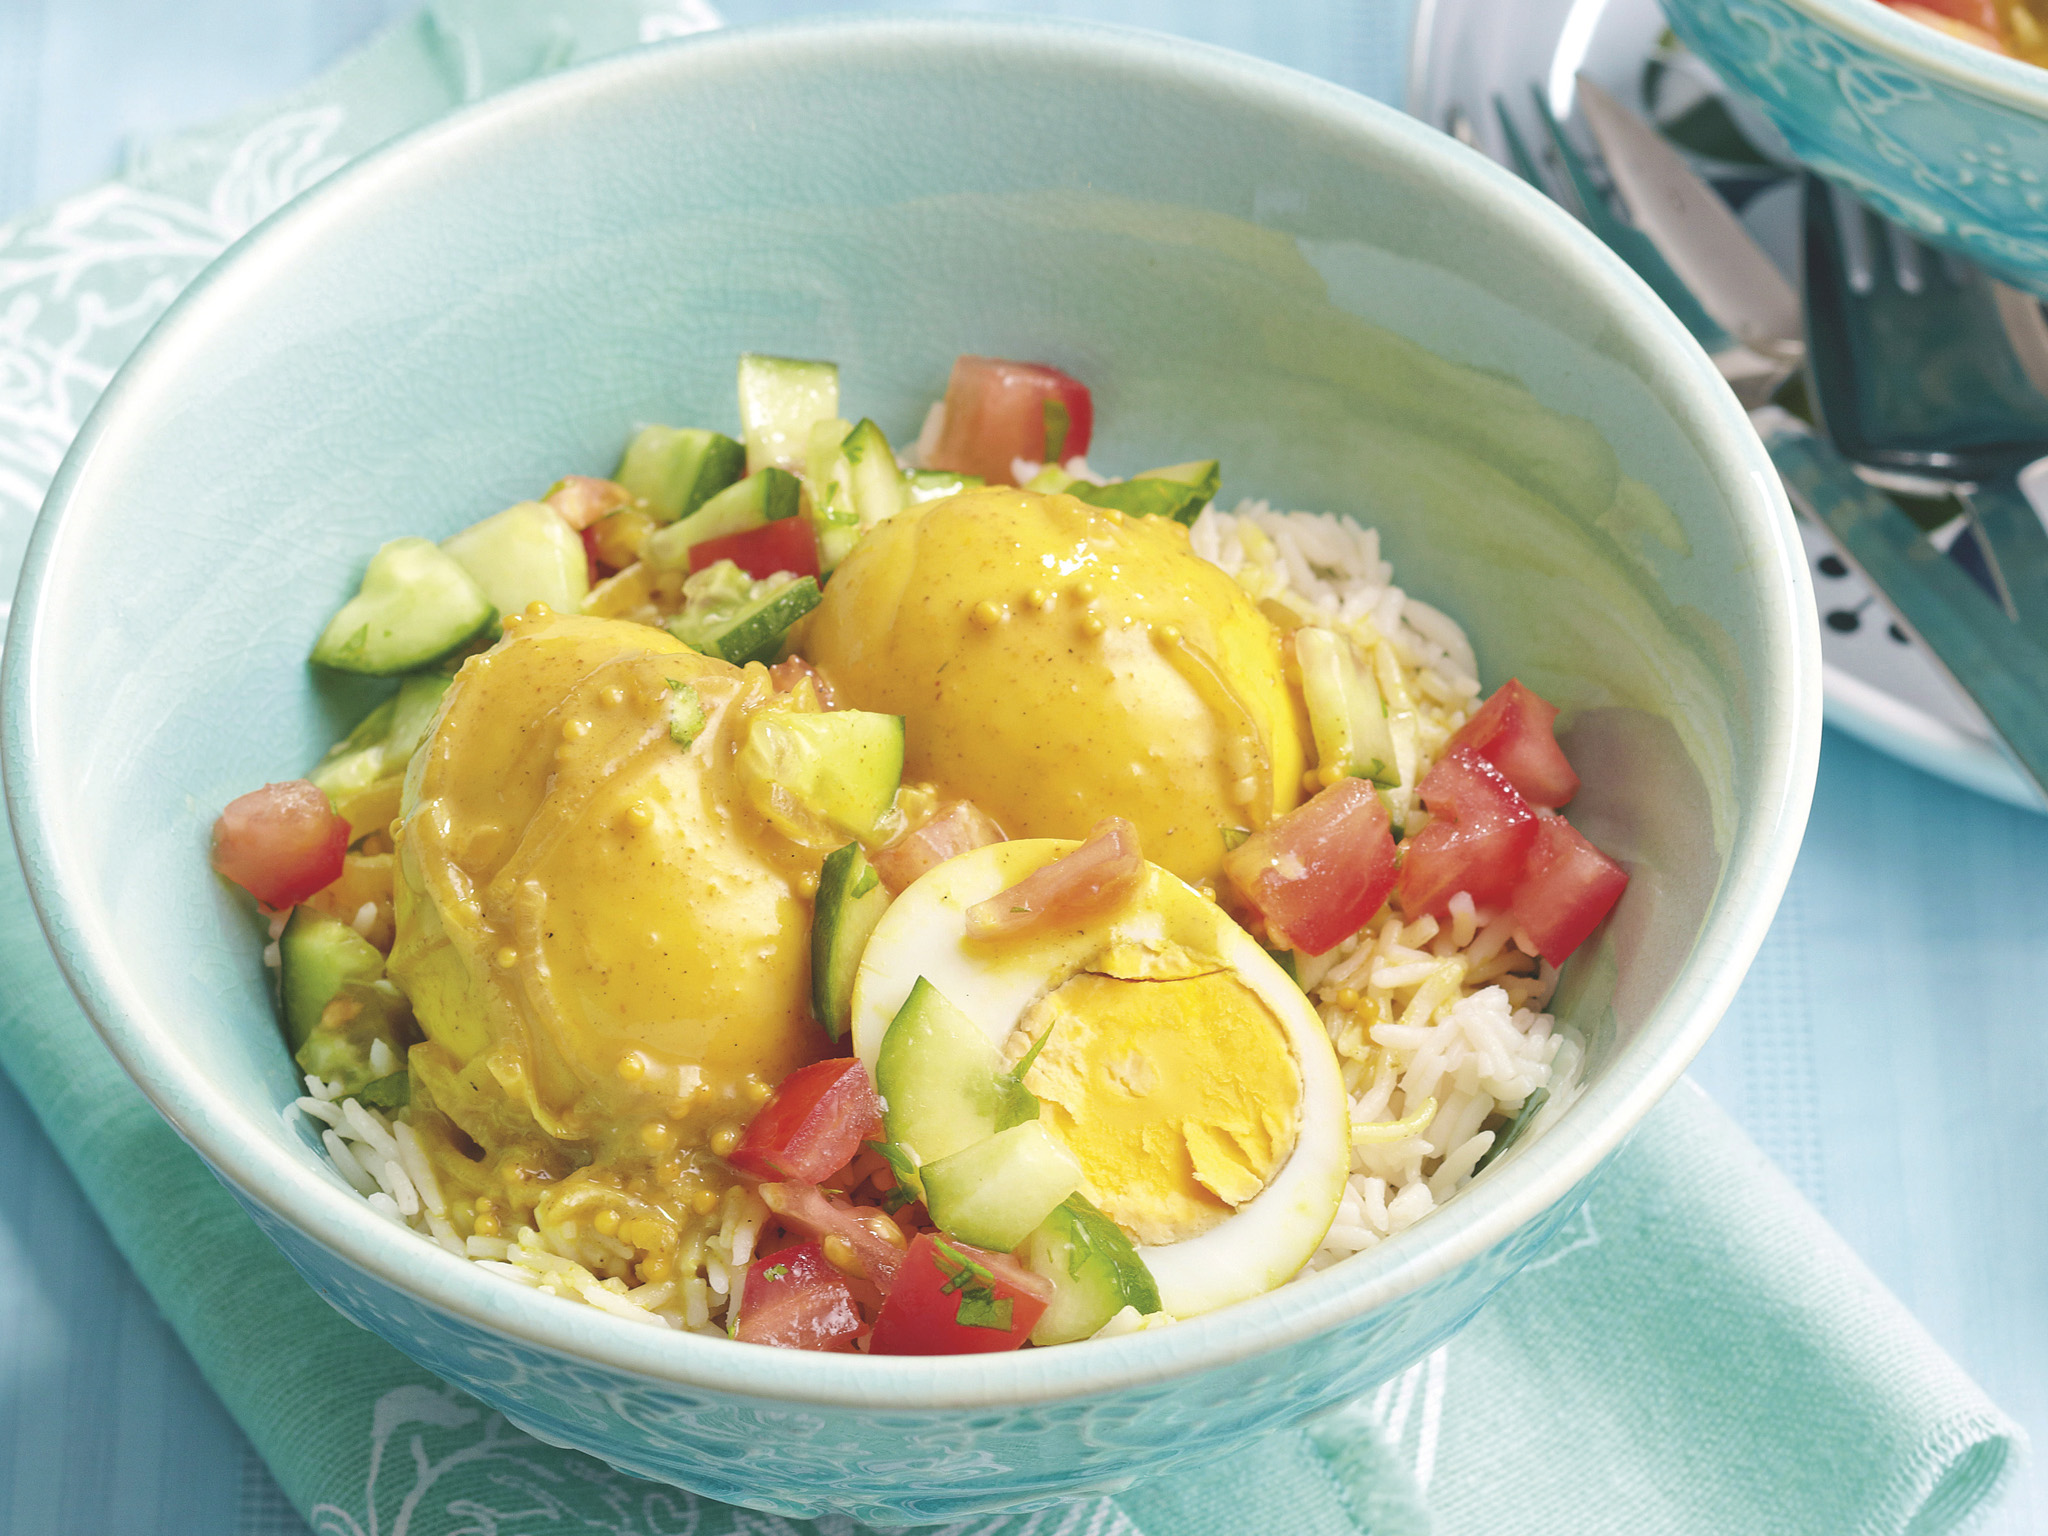 Curried Eggs